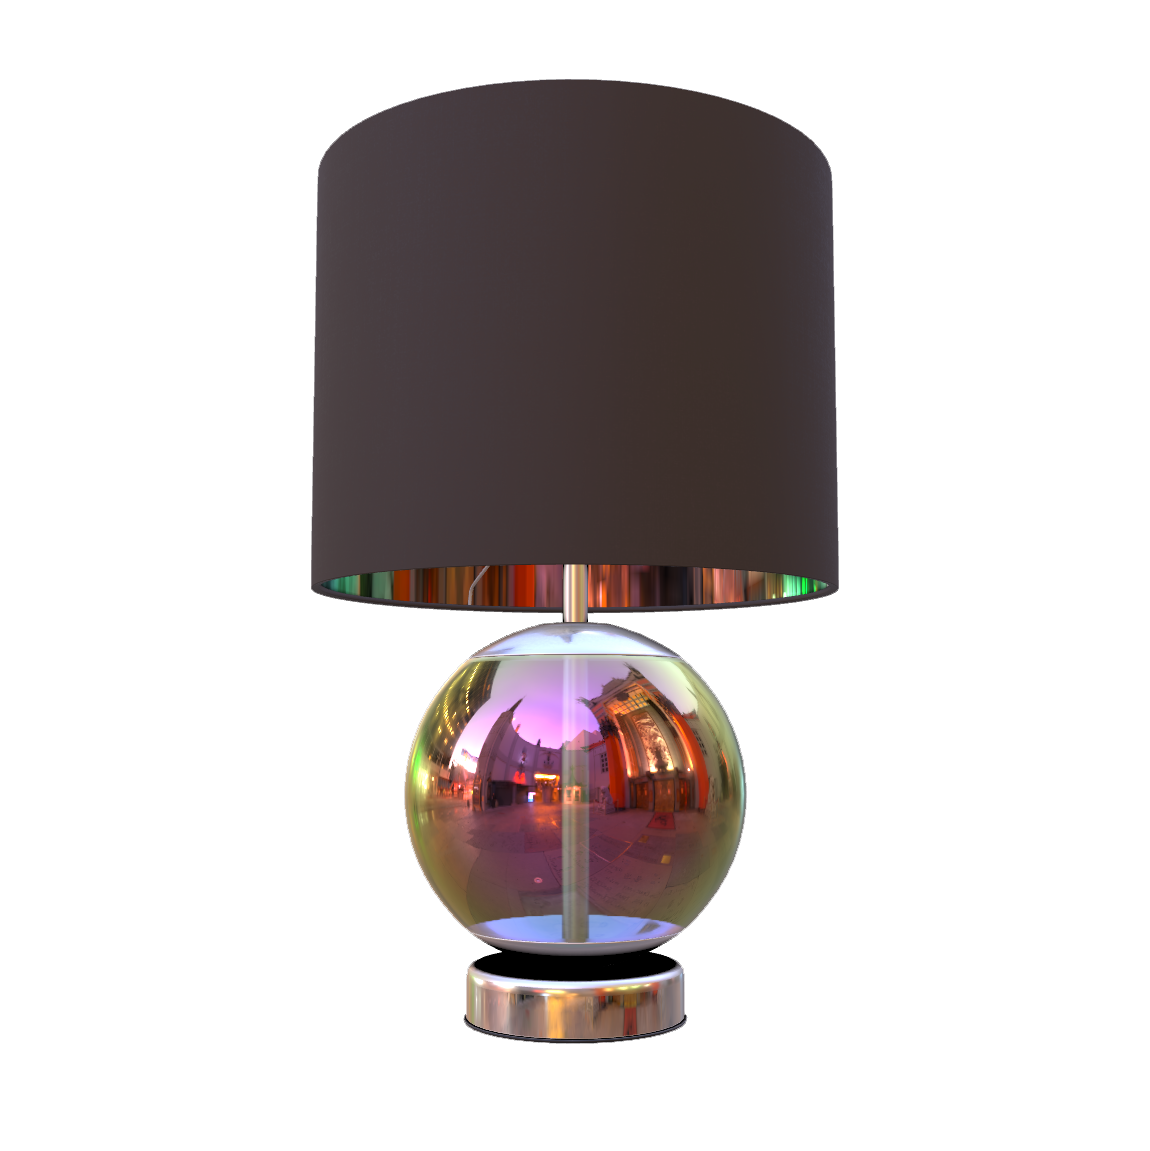 A 3D render of a lamp with an iridescent glass material making up a sphere for the lamp body and a grey shade with a shiny reflective interior.